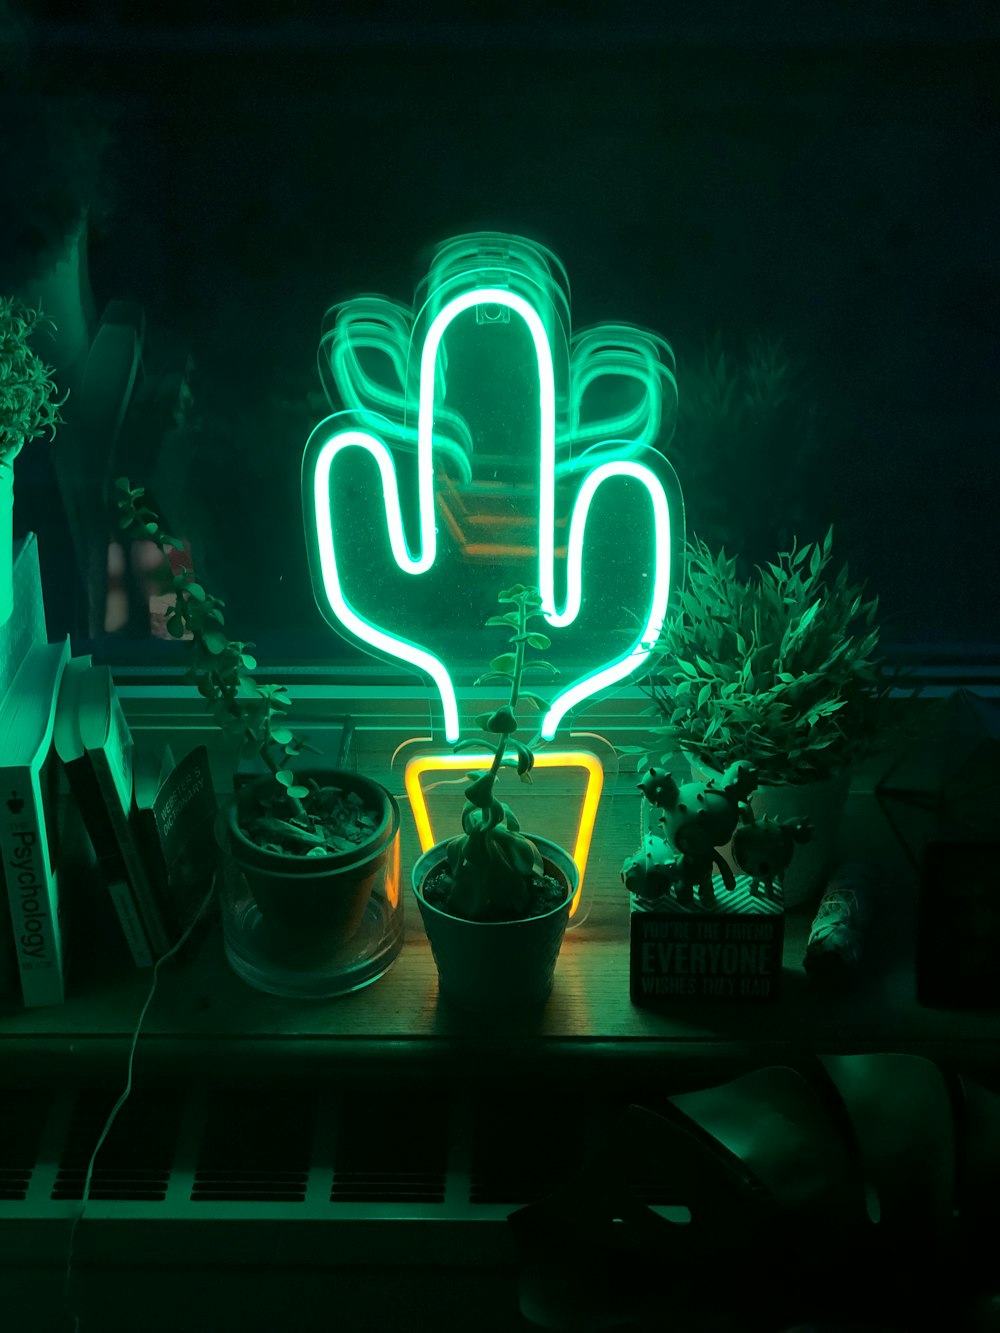 LED cactus neon light on table